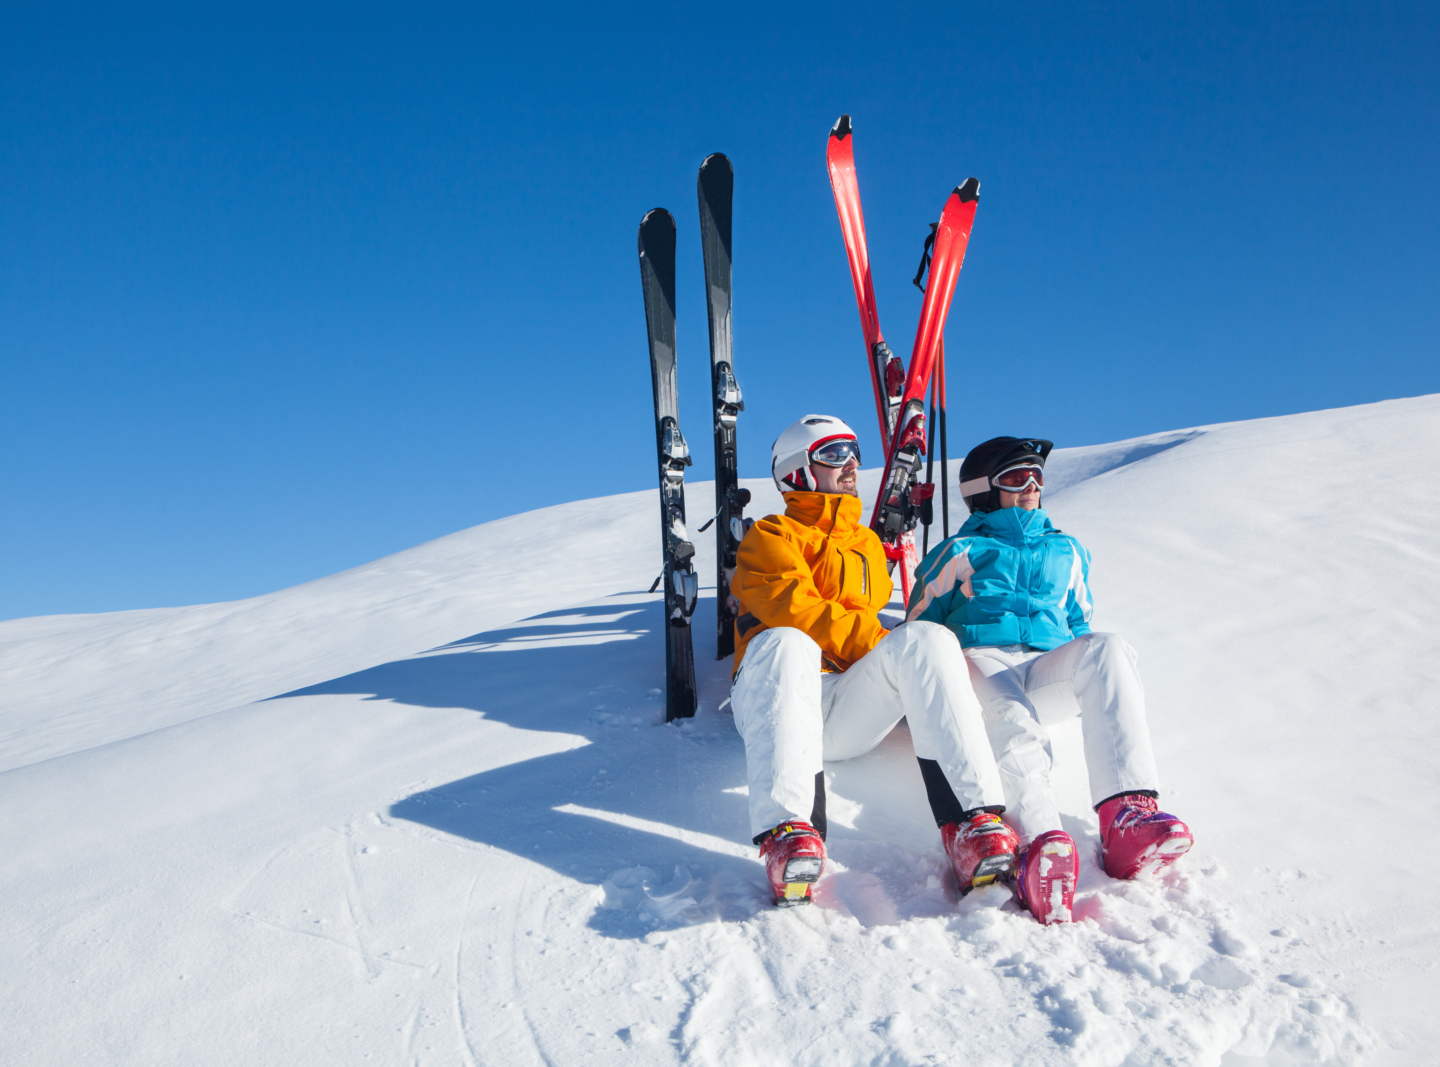 Learning To Ski As An Adult: Top 7 Skiing Tips For Beginners - Take Regular Breaks 